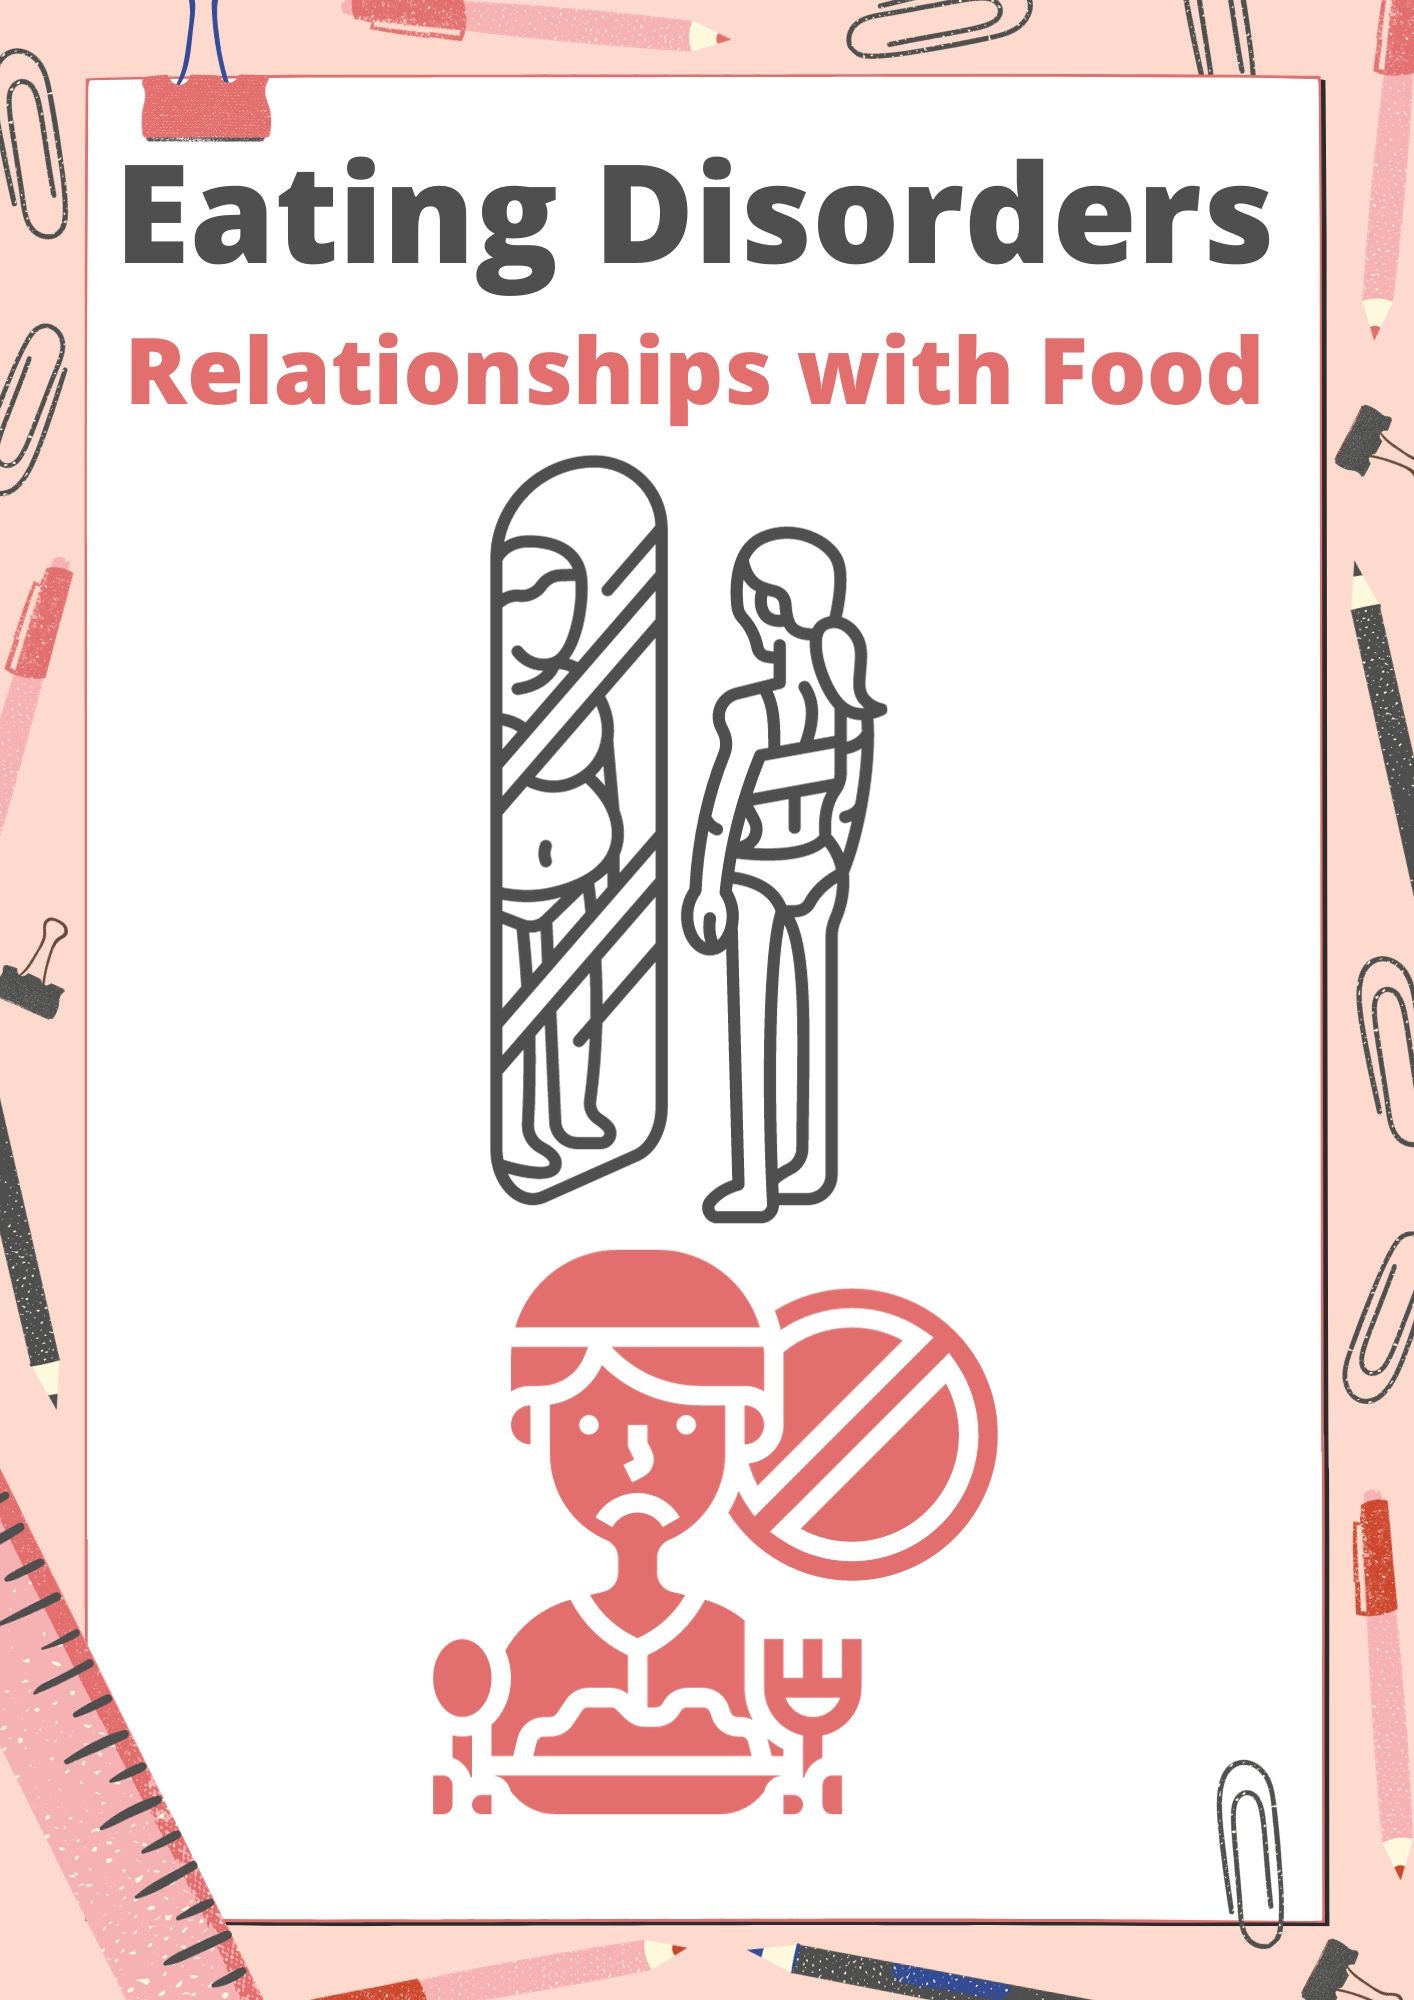 Eating Disorders - Relationships with Food